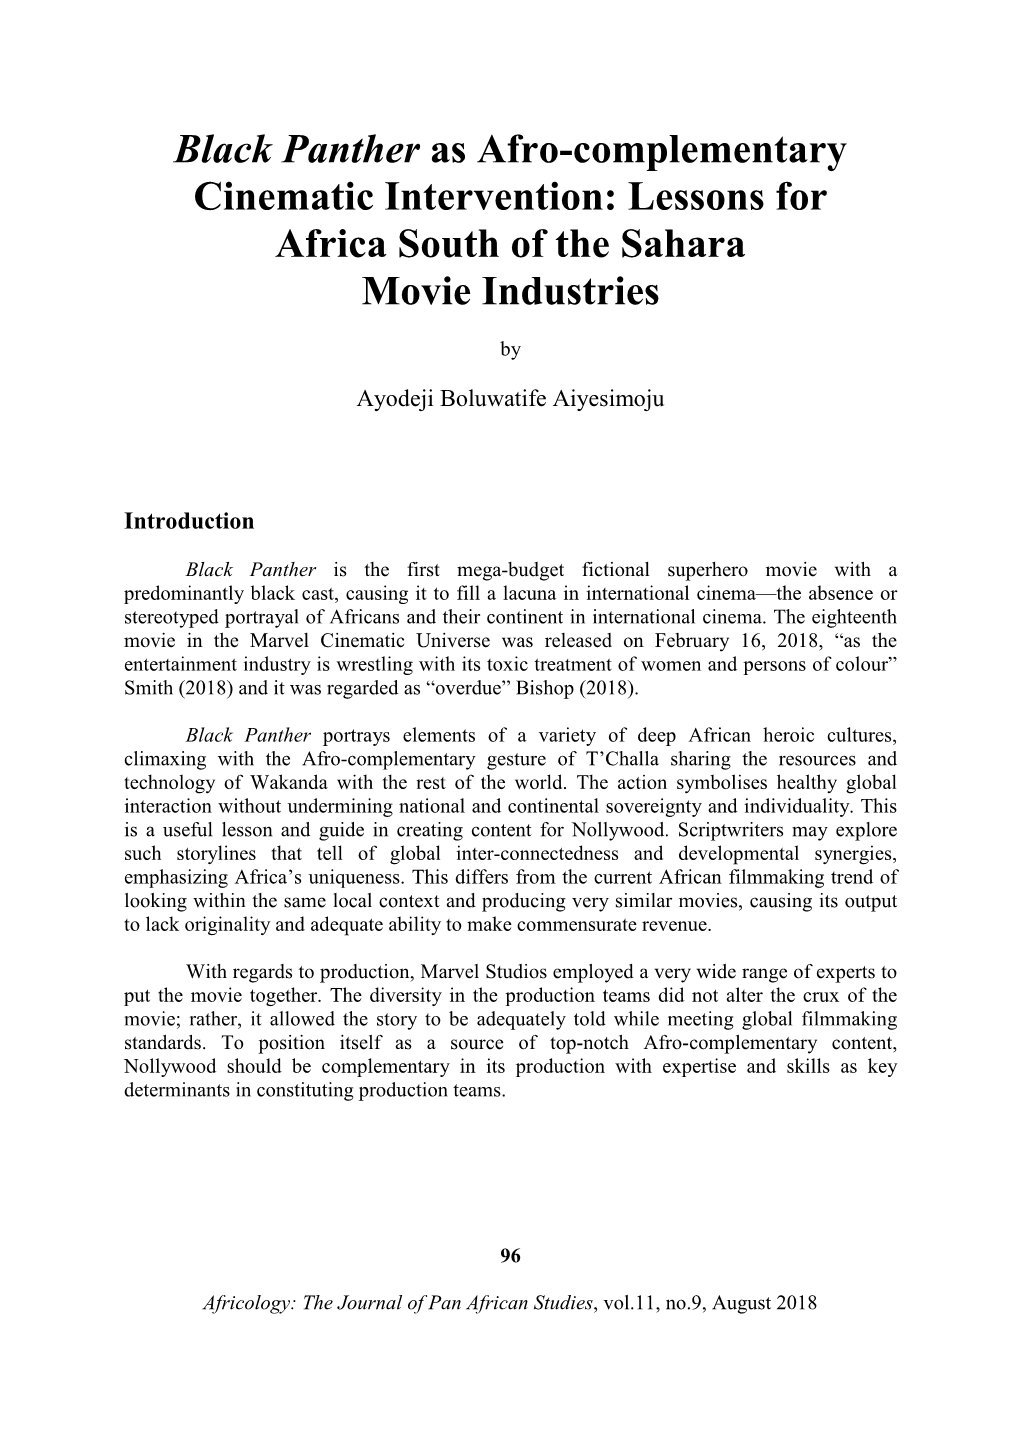 Black Panther As Afro-Complementary Cinematic Intervention: Lessons for Africa South of the Sahara Movie Industries